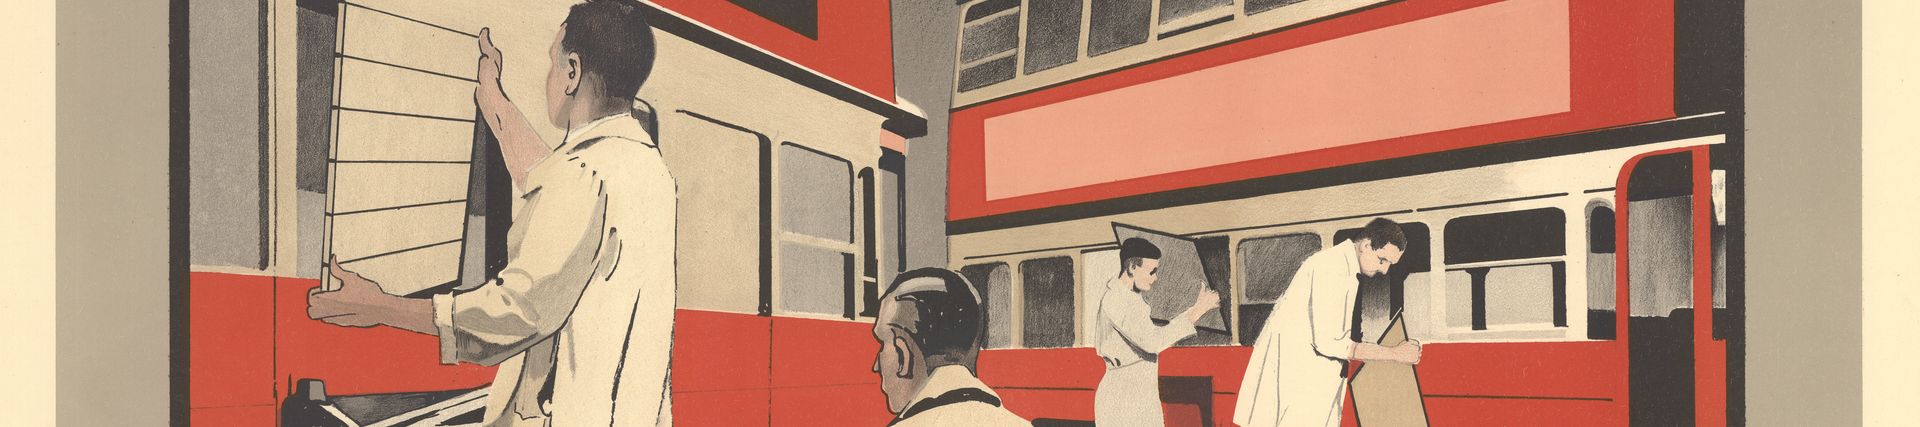 Poster; Rehabilitation, it takes time; bus windows, by Fred Taylor, 1945